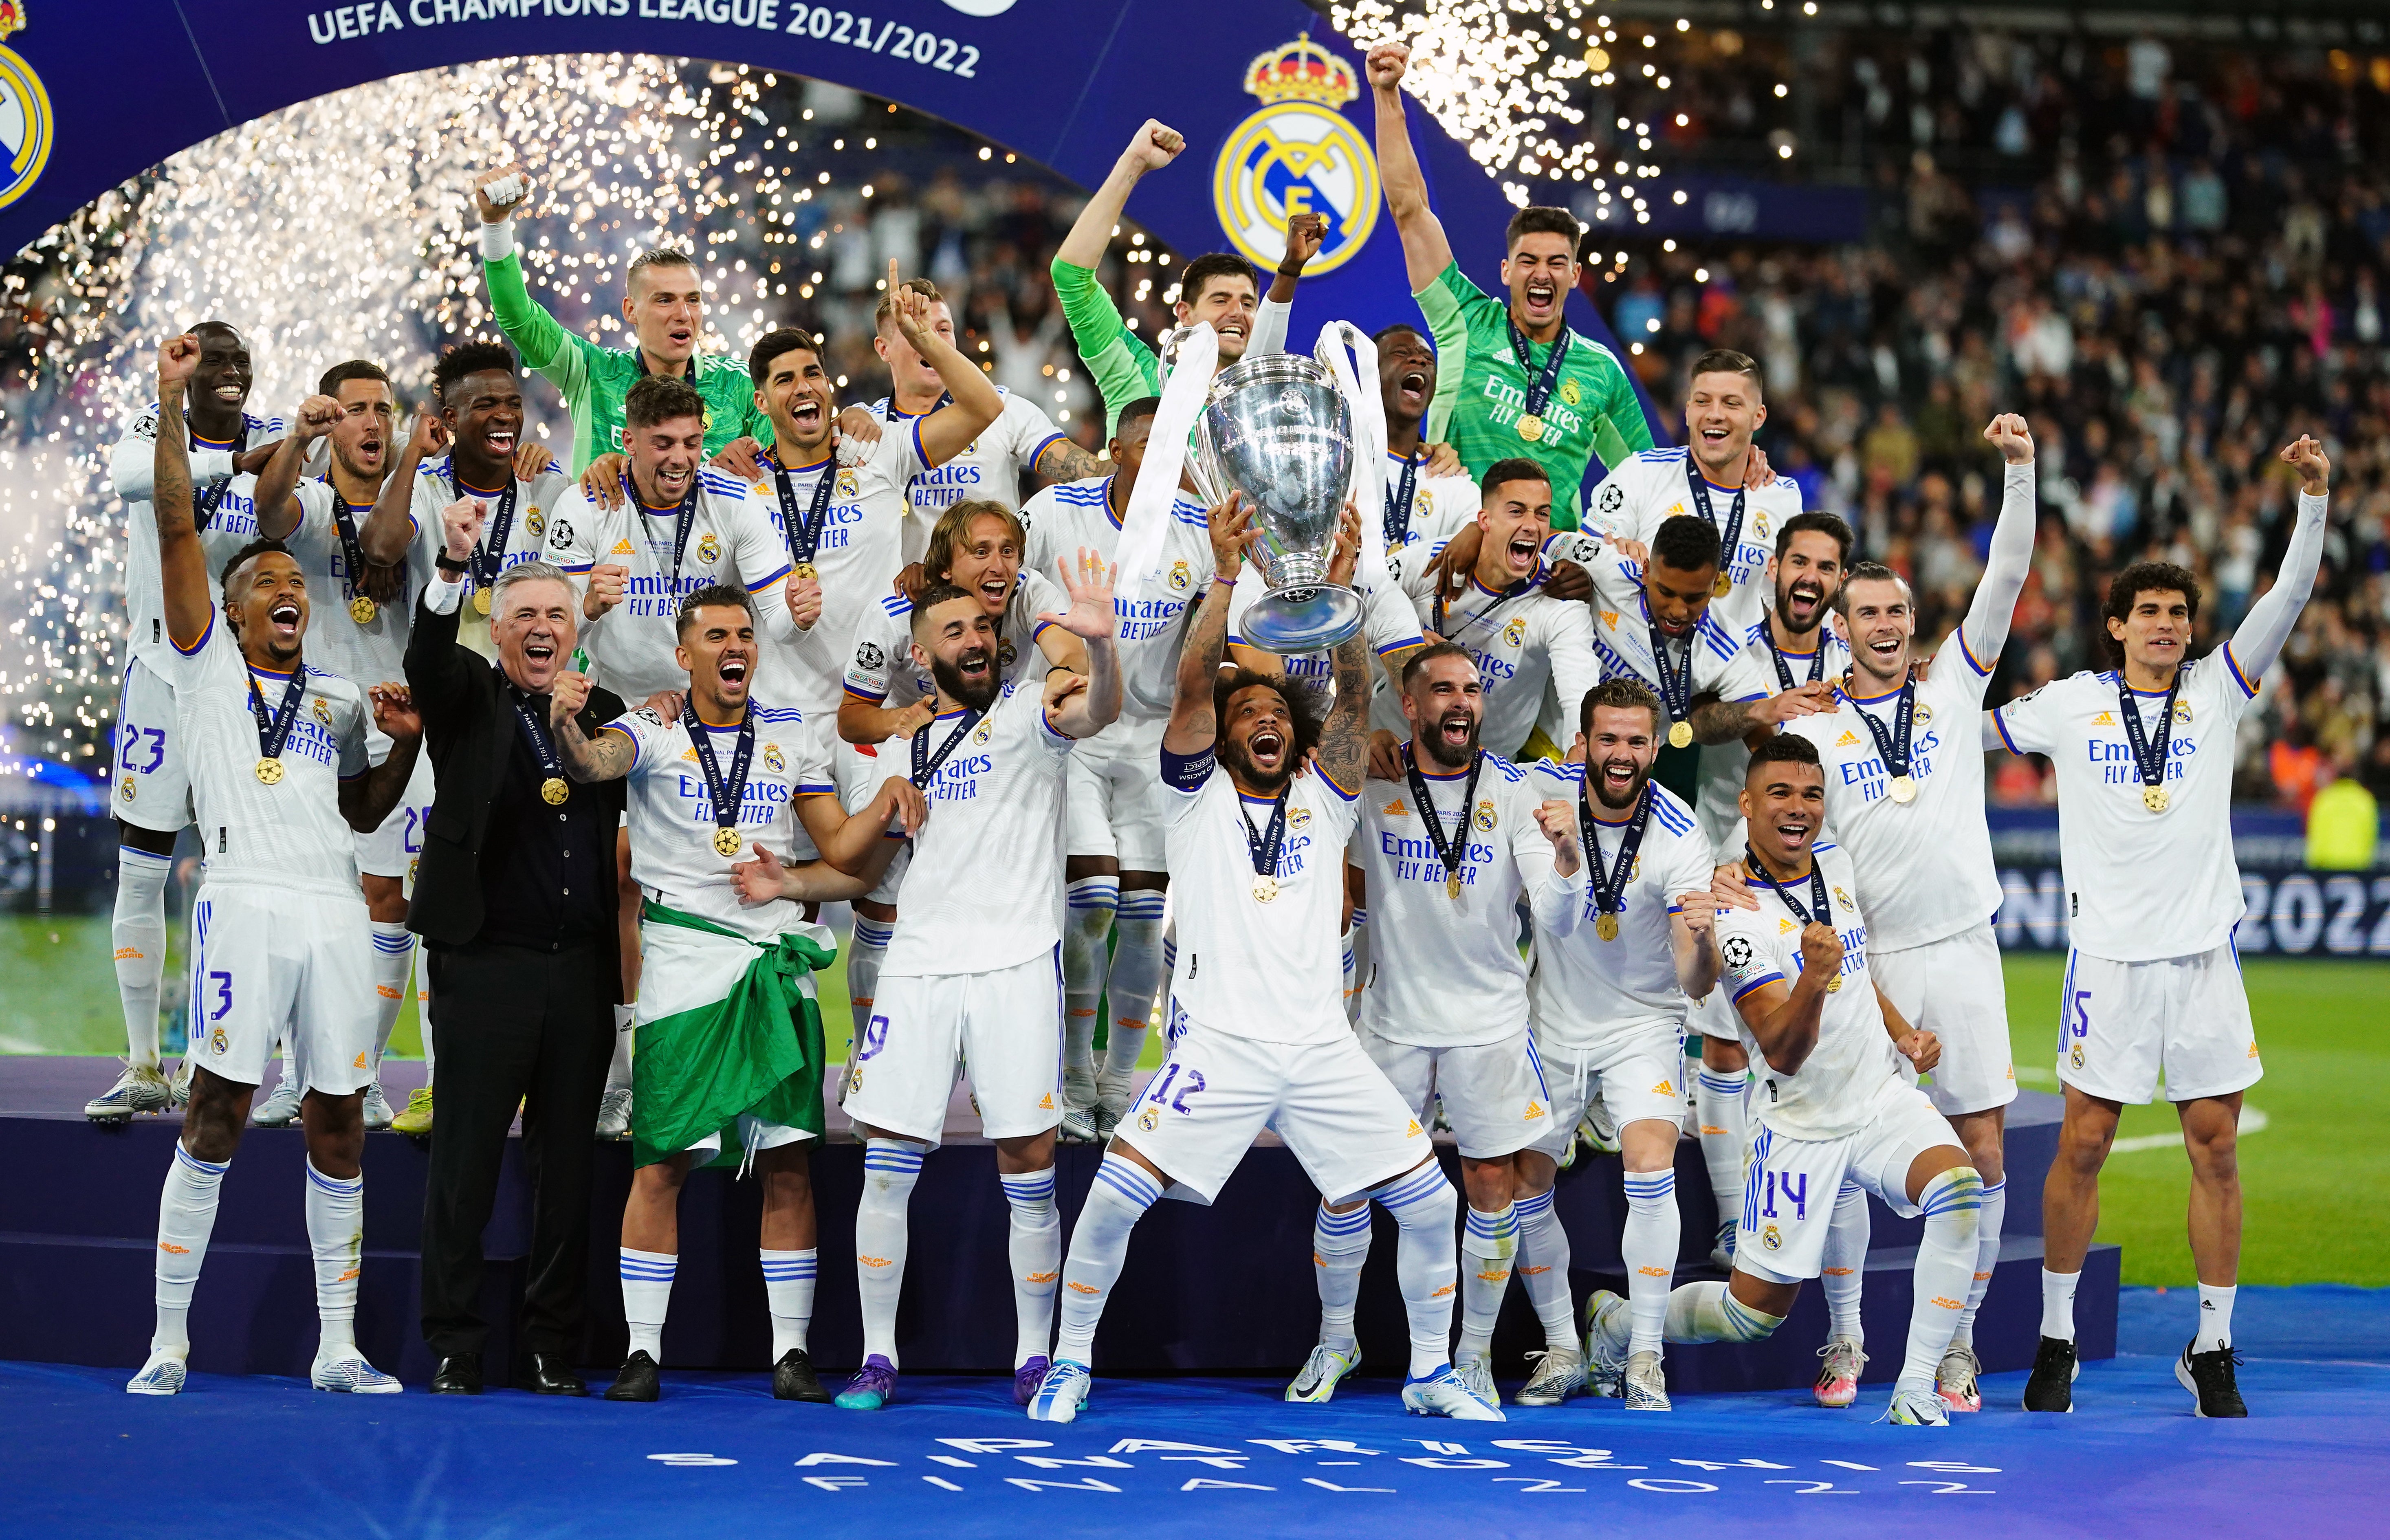 Celtic face holders Real Madrid (pictured) as the Champions League begins this week (Adam Davy/PA)